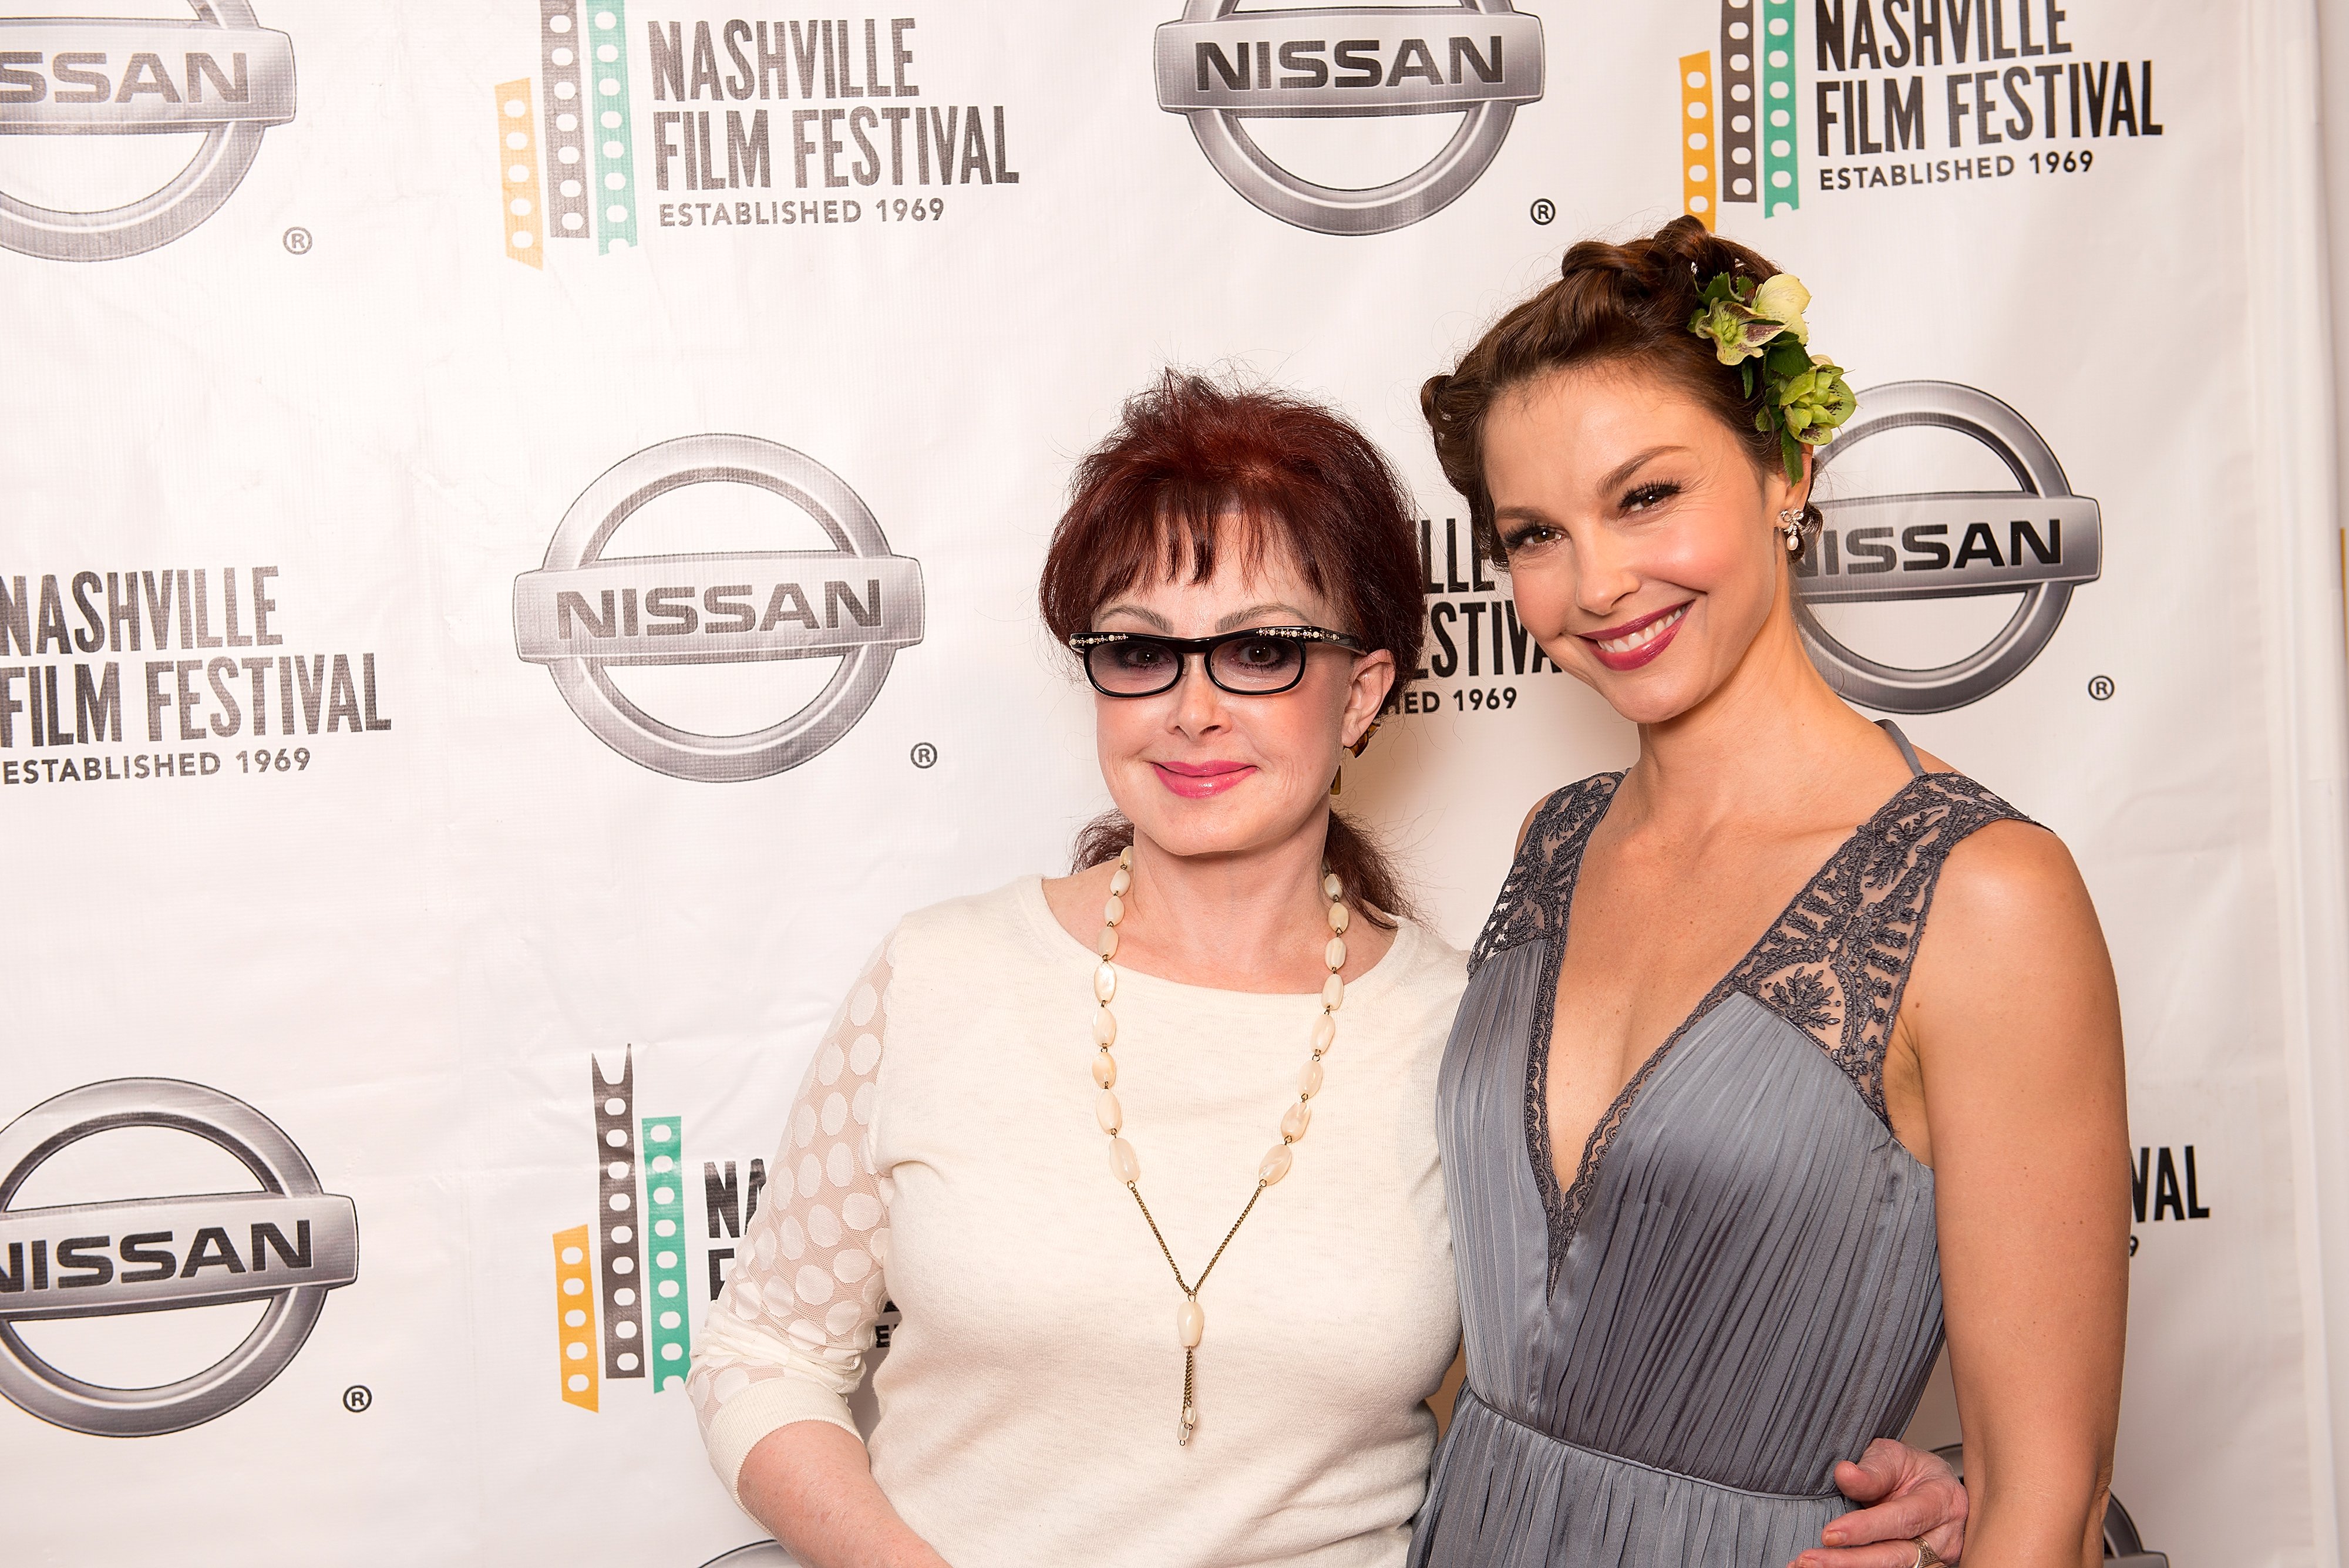 Naomi and Ashley Judd at the screening of the film "The Idenitical" at the Nashville Film Festival on April 26, 2014, in Nashville, Tennessee. | Source: Beth Gwinn/Getty Images